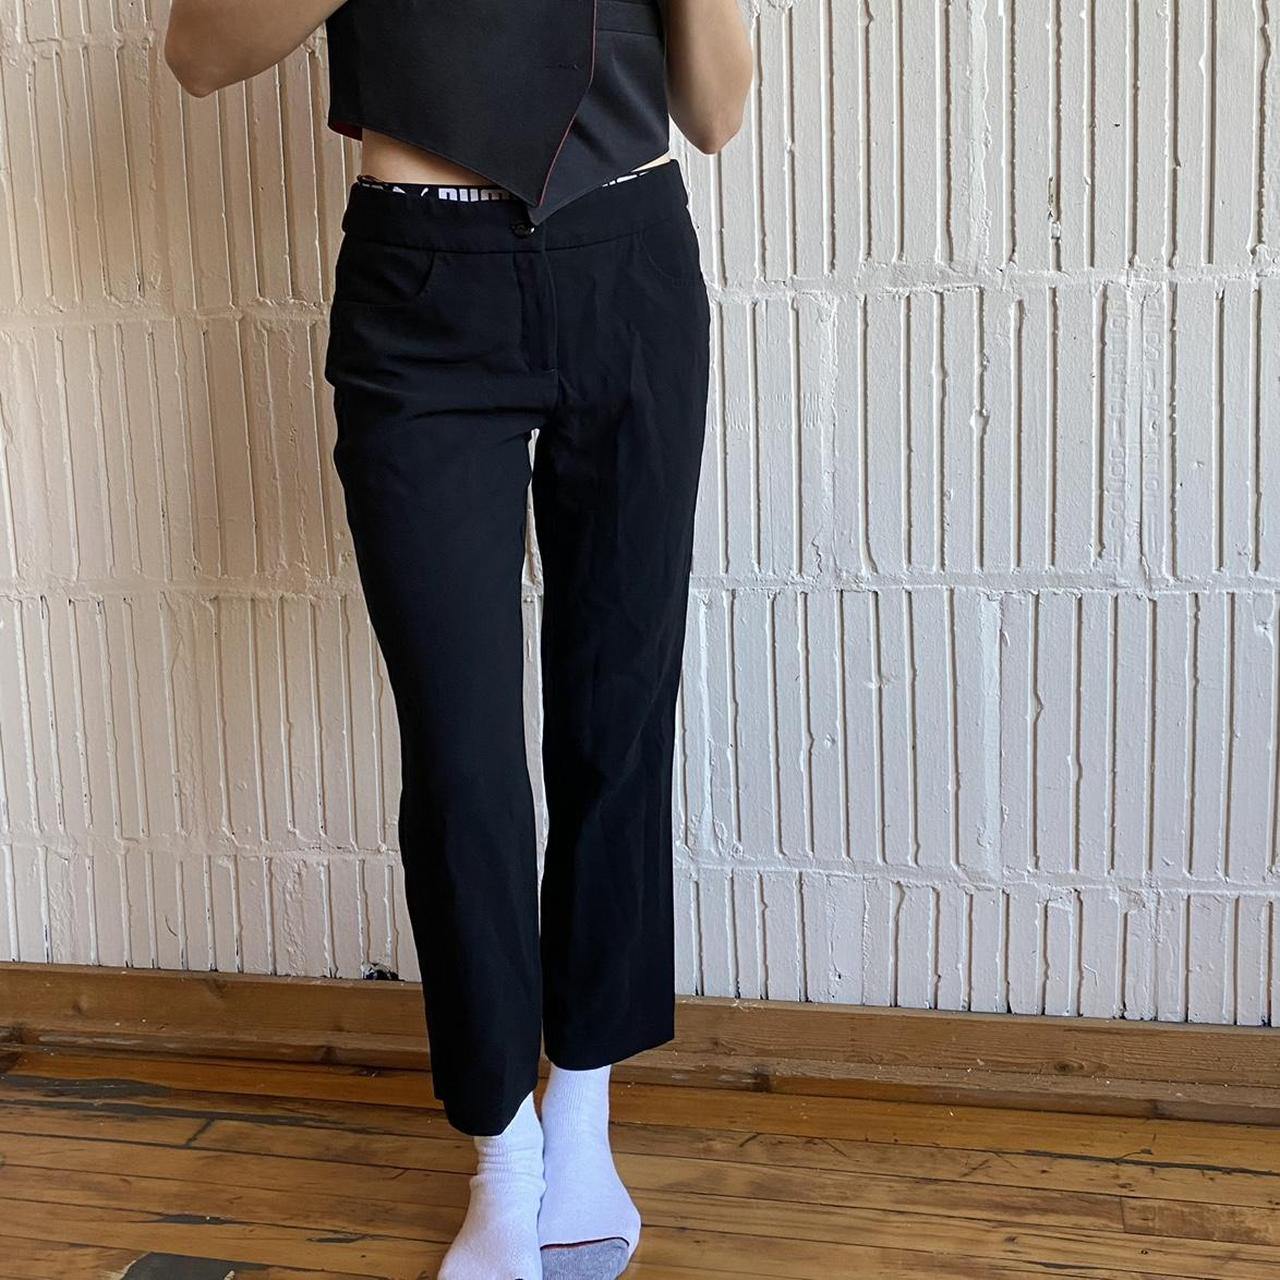 Black Chanel Uniform Pant, -labeled 38, -selling as